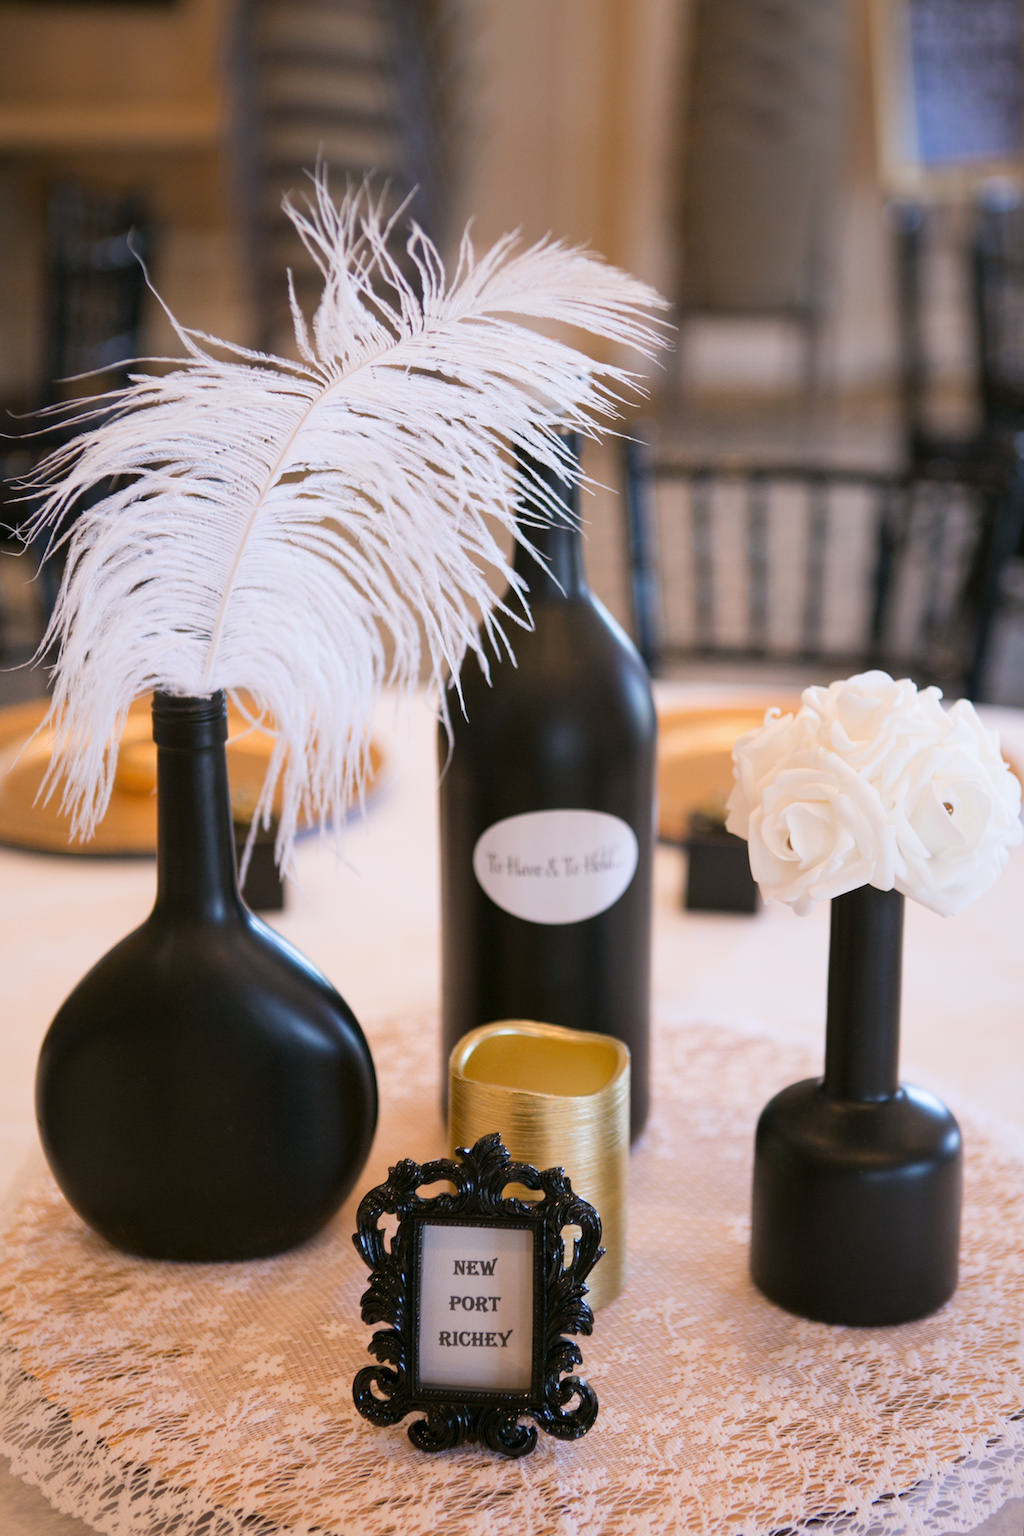 Indoor Ballroom Wedding Reception Decor, Black Vases with White Feather and Roses on Floral Linen | Sarasota Wedding Photographer Carrie Wildes Photography